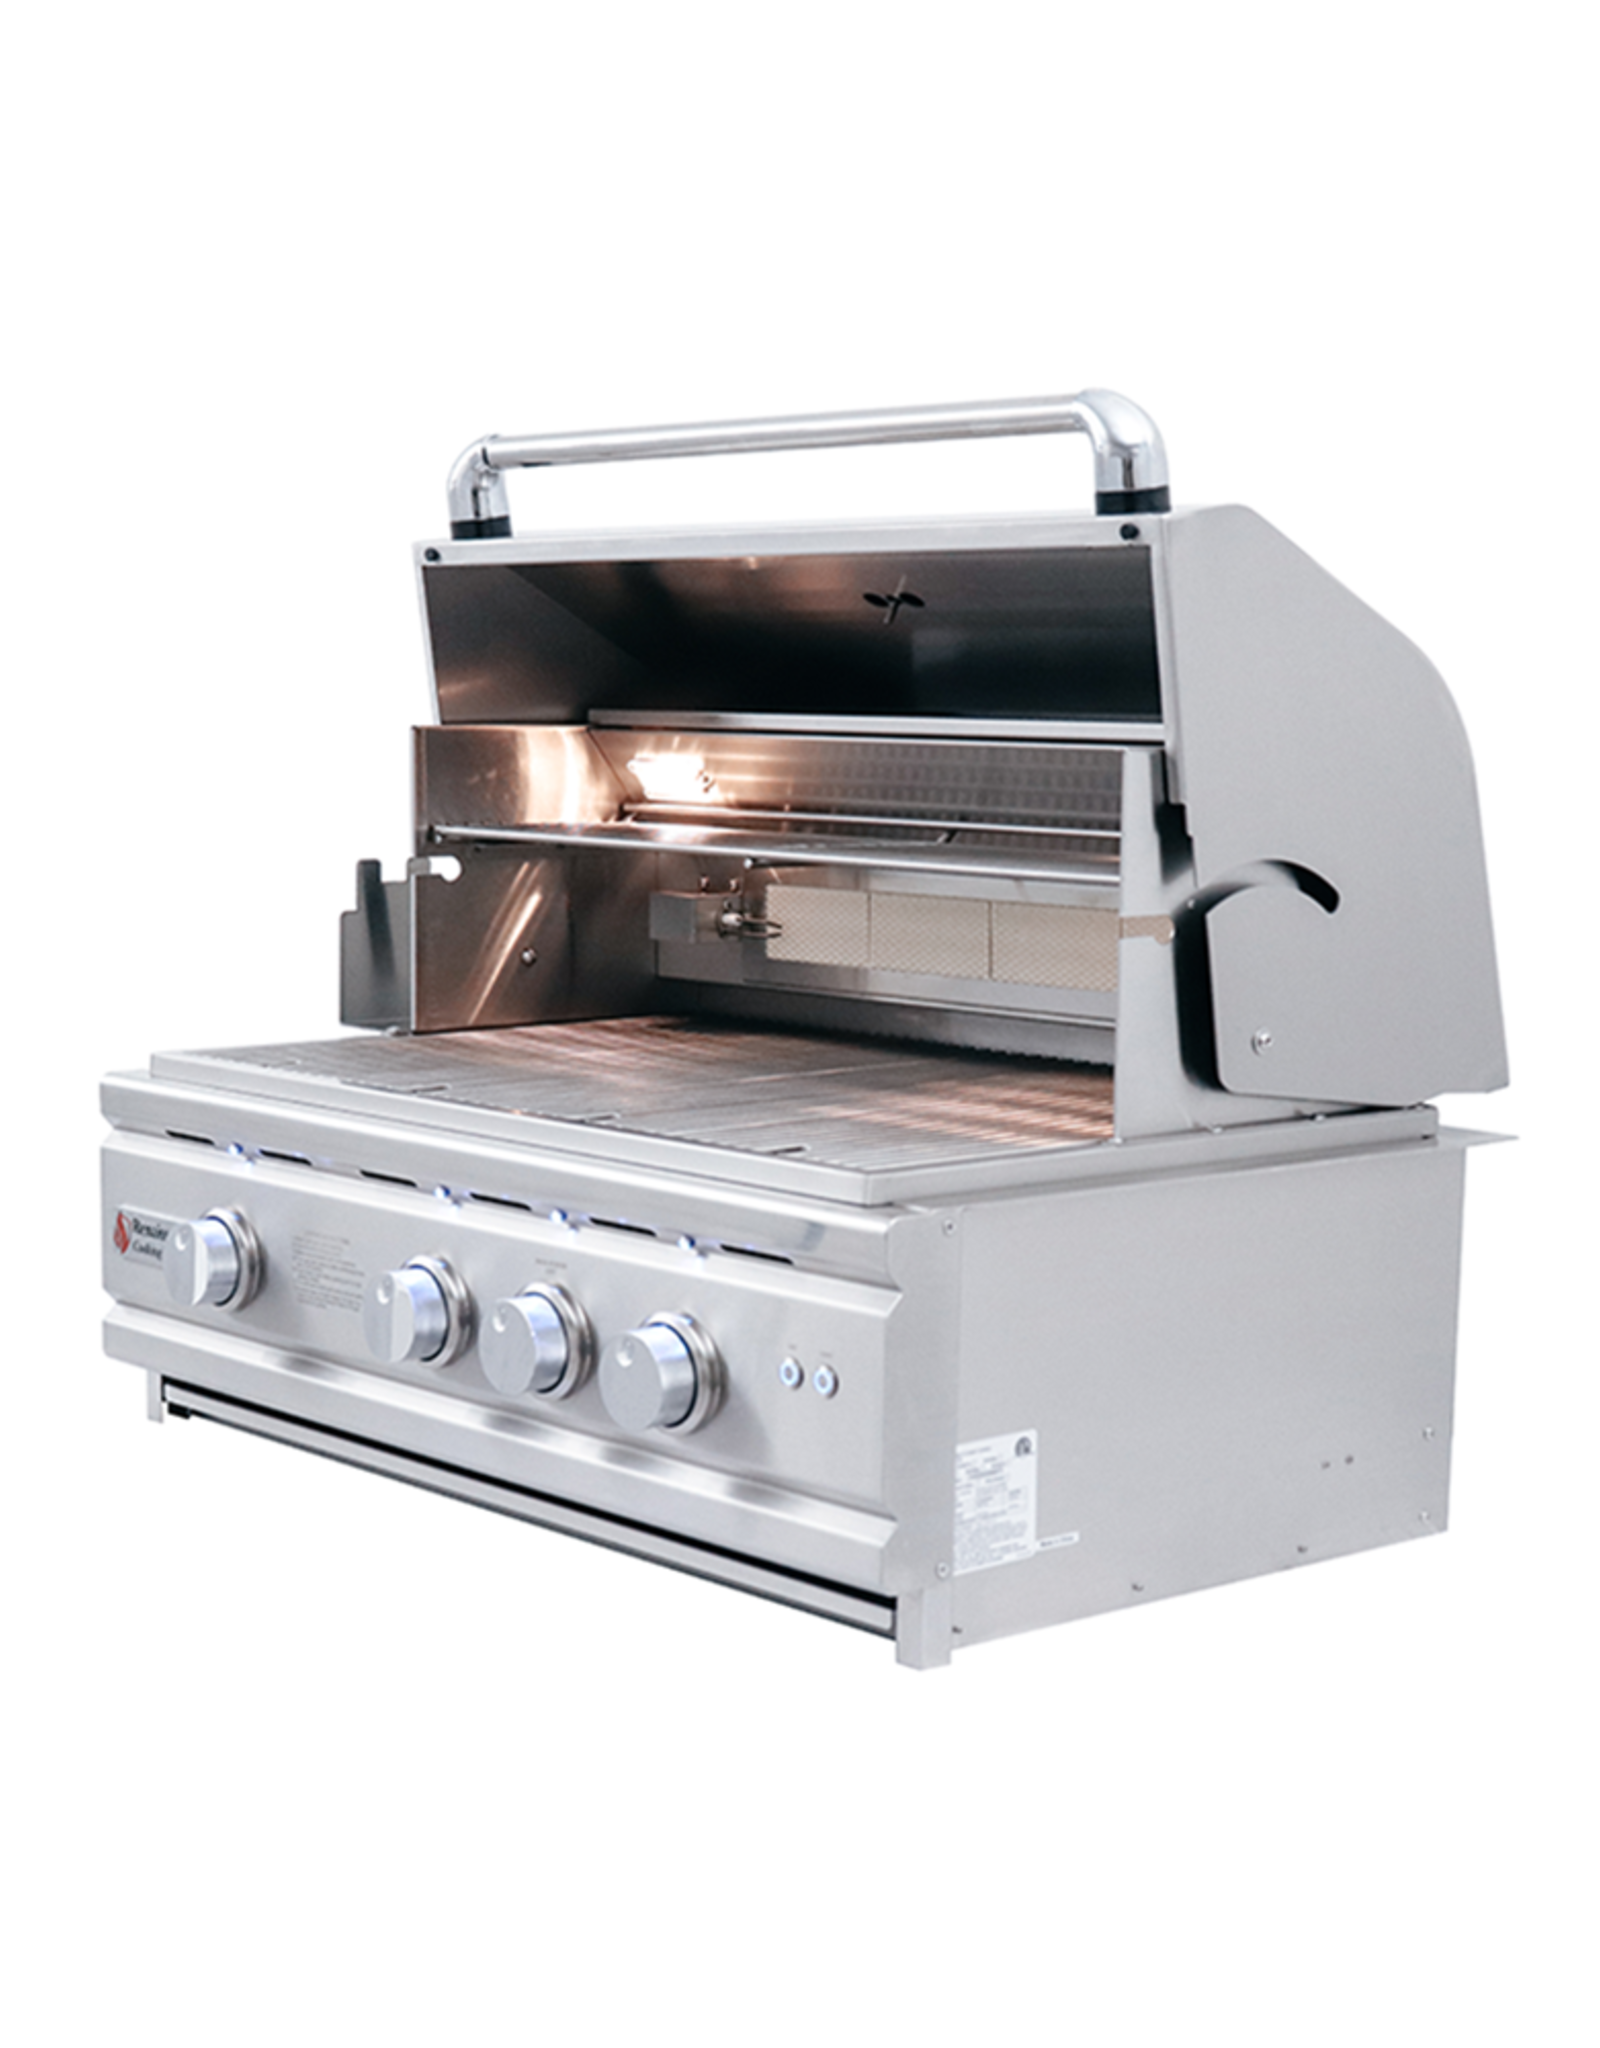 Renaissance Cooking Systems Renaissance Cooking Systems 30" Cutlass Pro Drop-In Grill - Natural Gas - RON30A